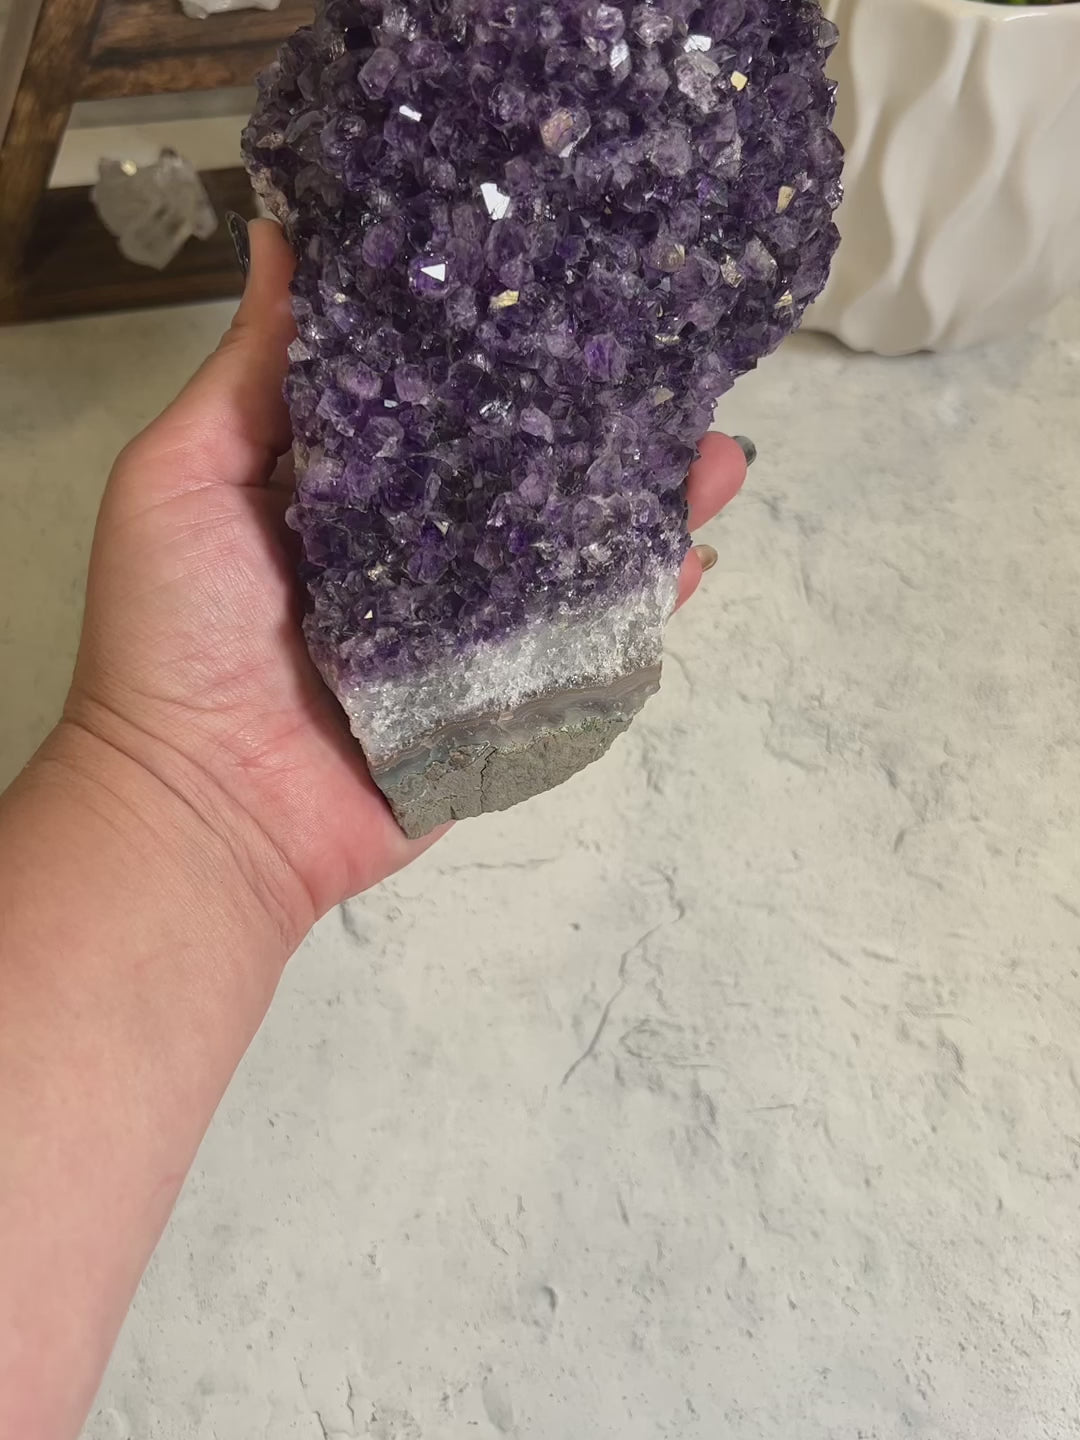 Video of large amethyst cluster with a woman holding it.